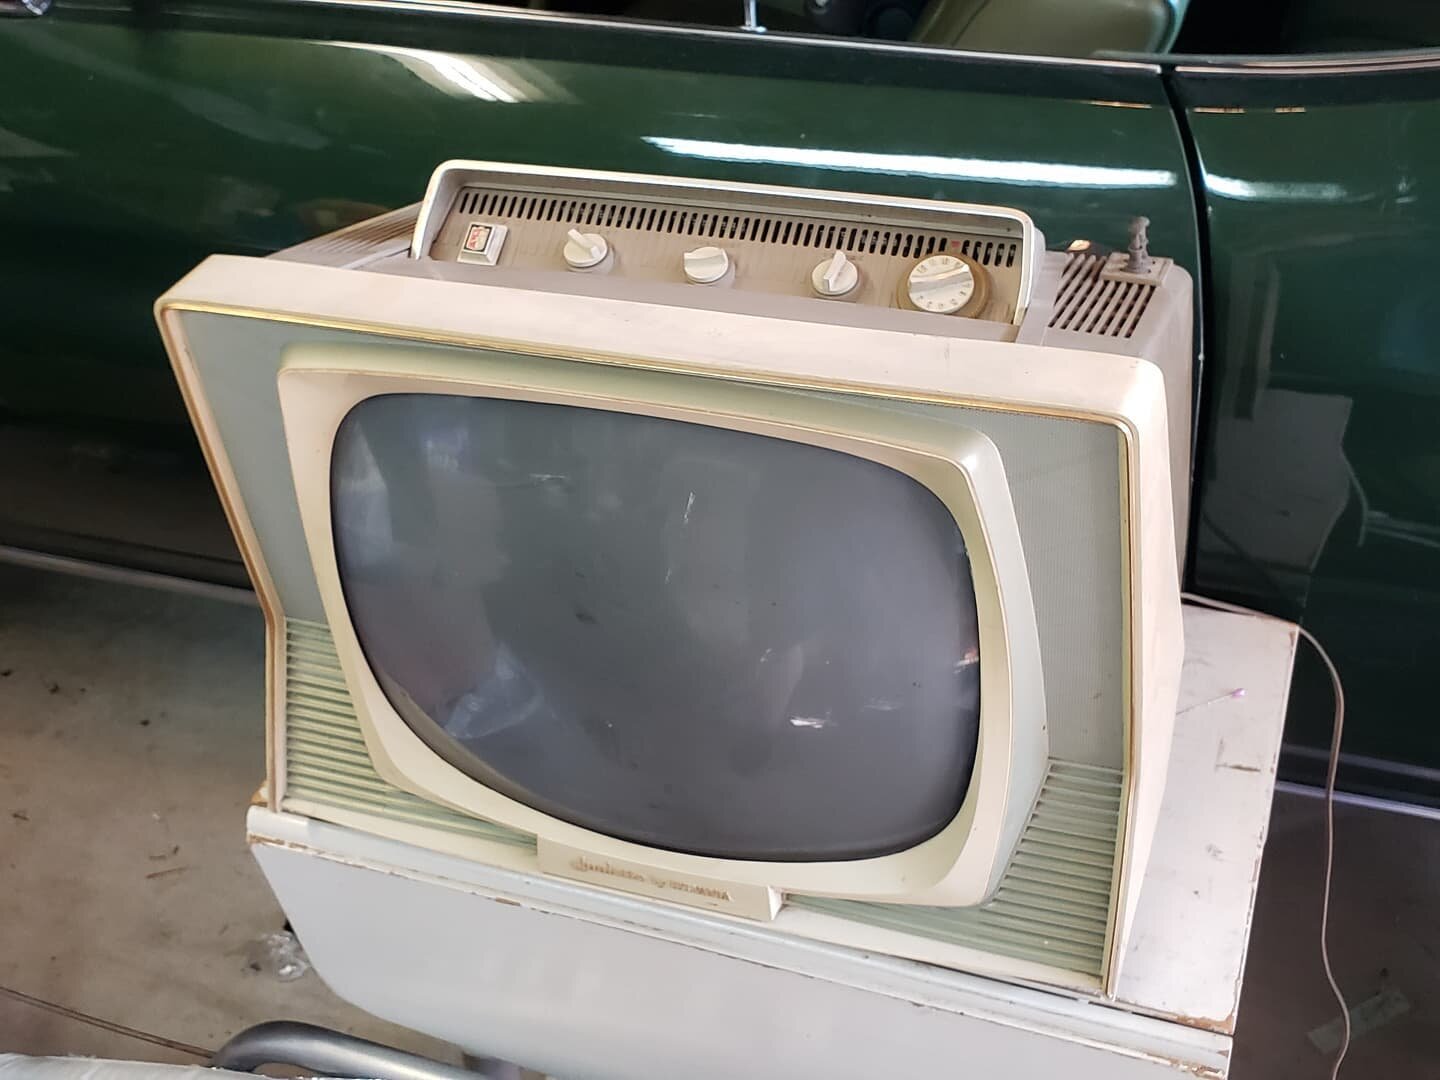 $175. Vintage 1959 Sylvania Dualette TV set mid century modern mcm retro atomic mod designer home decor item. 17 inch tv does not work, sold as is. BLACK AND WHITE TUBE TELEVISION SET, TABLE TOP MODEL, HARD PLASTIC CASE. 
Plus tax.
This item is locat